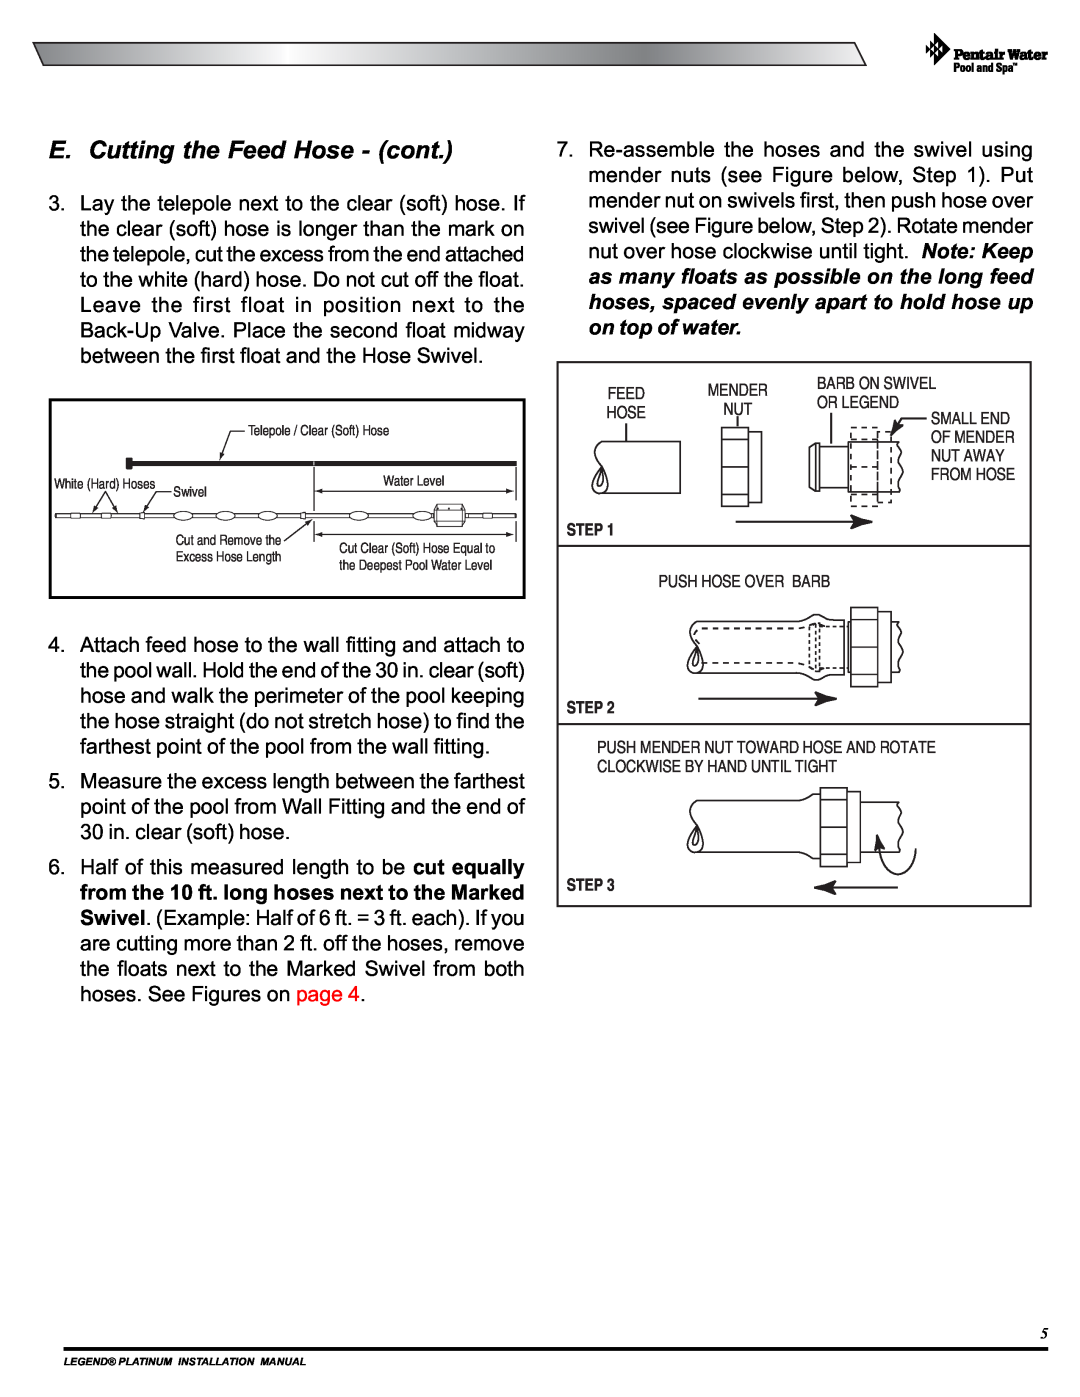 Pentair Side Pool Cleaner installation manual E. Cutting the Feed Hose - cont, Step 